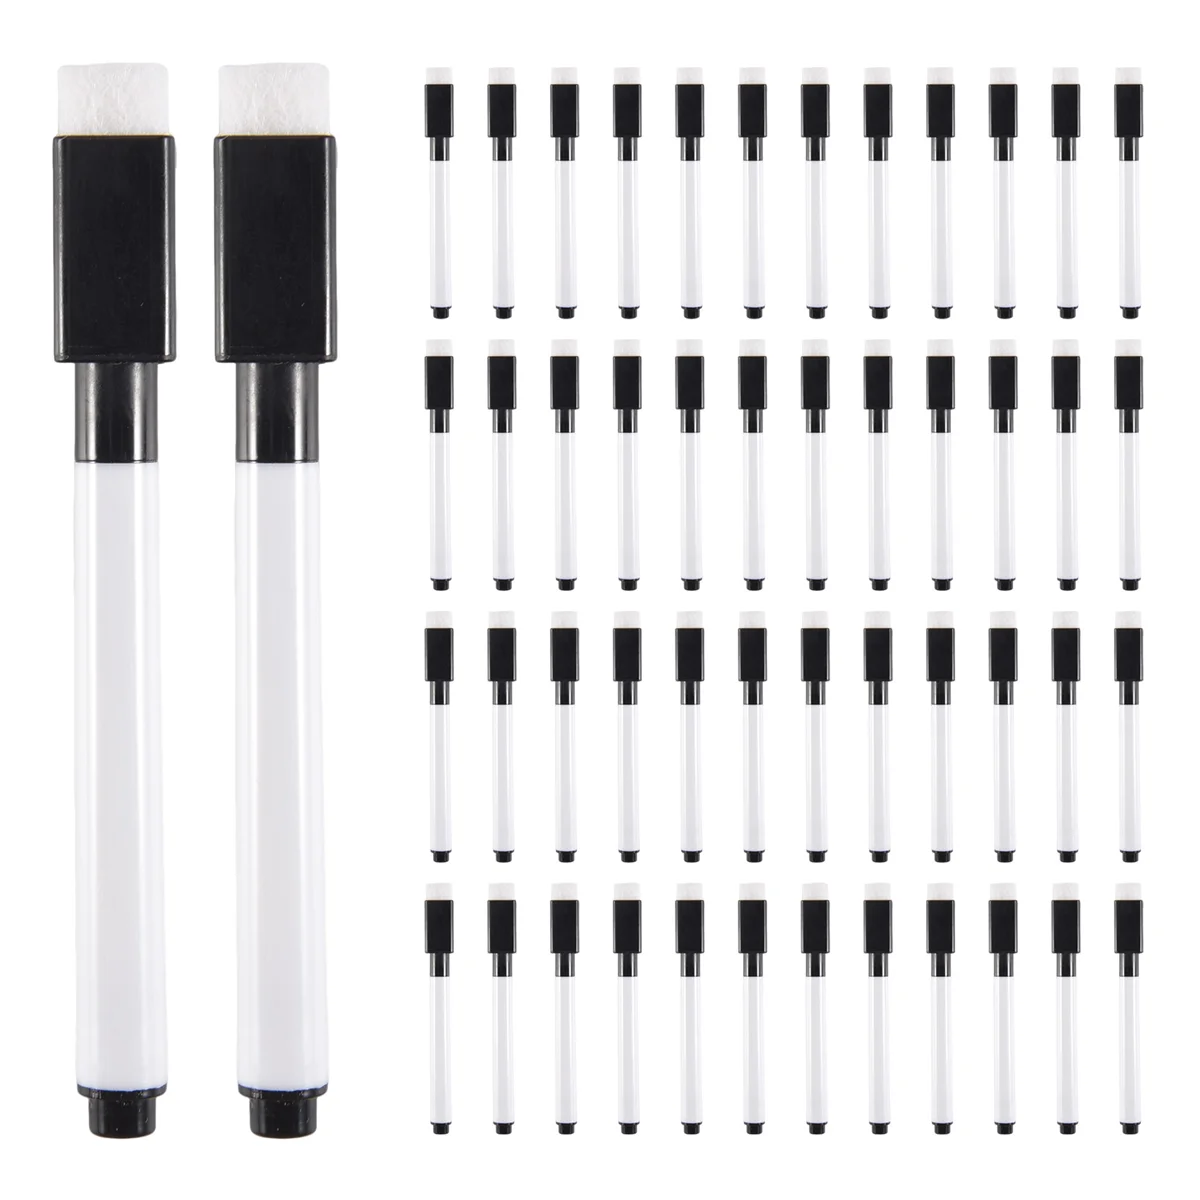 

50 Pen Water Colour Whiteboard Marker Pens Dry Erase White Board Pen with Eraser Magnetic Markers Writing WaterColor Pen